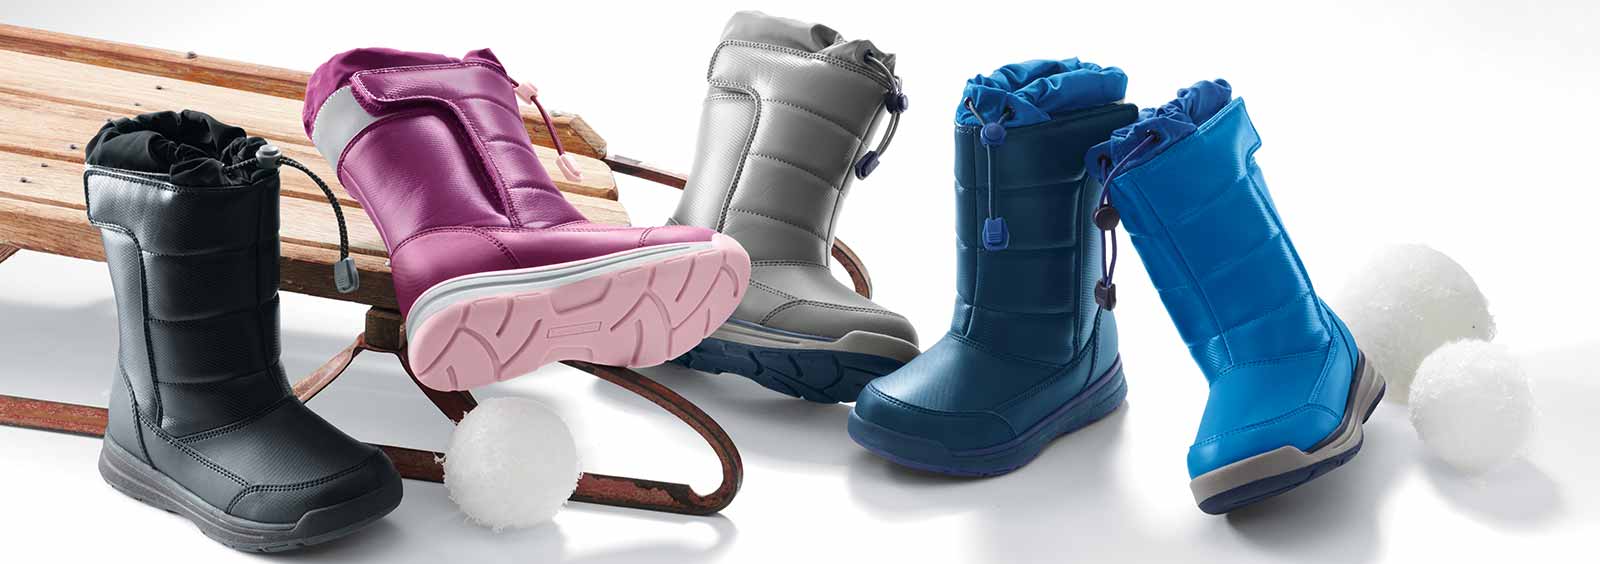 What are the Best Snow Boots for Toddlers?